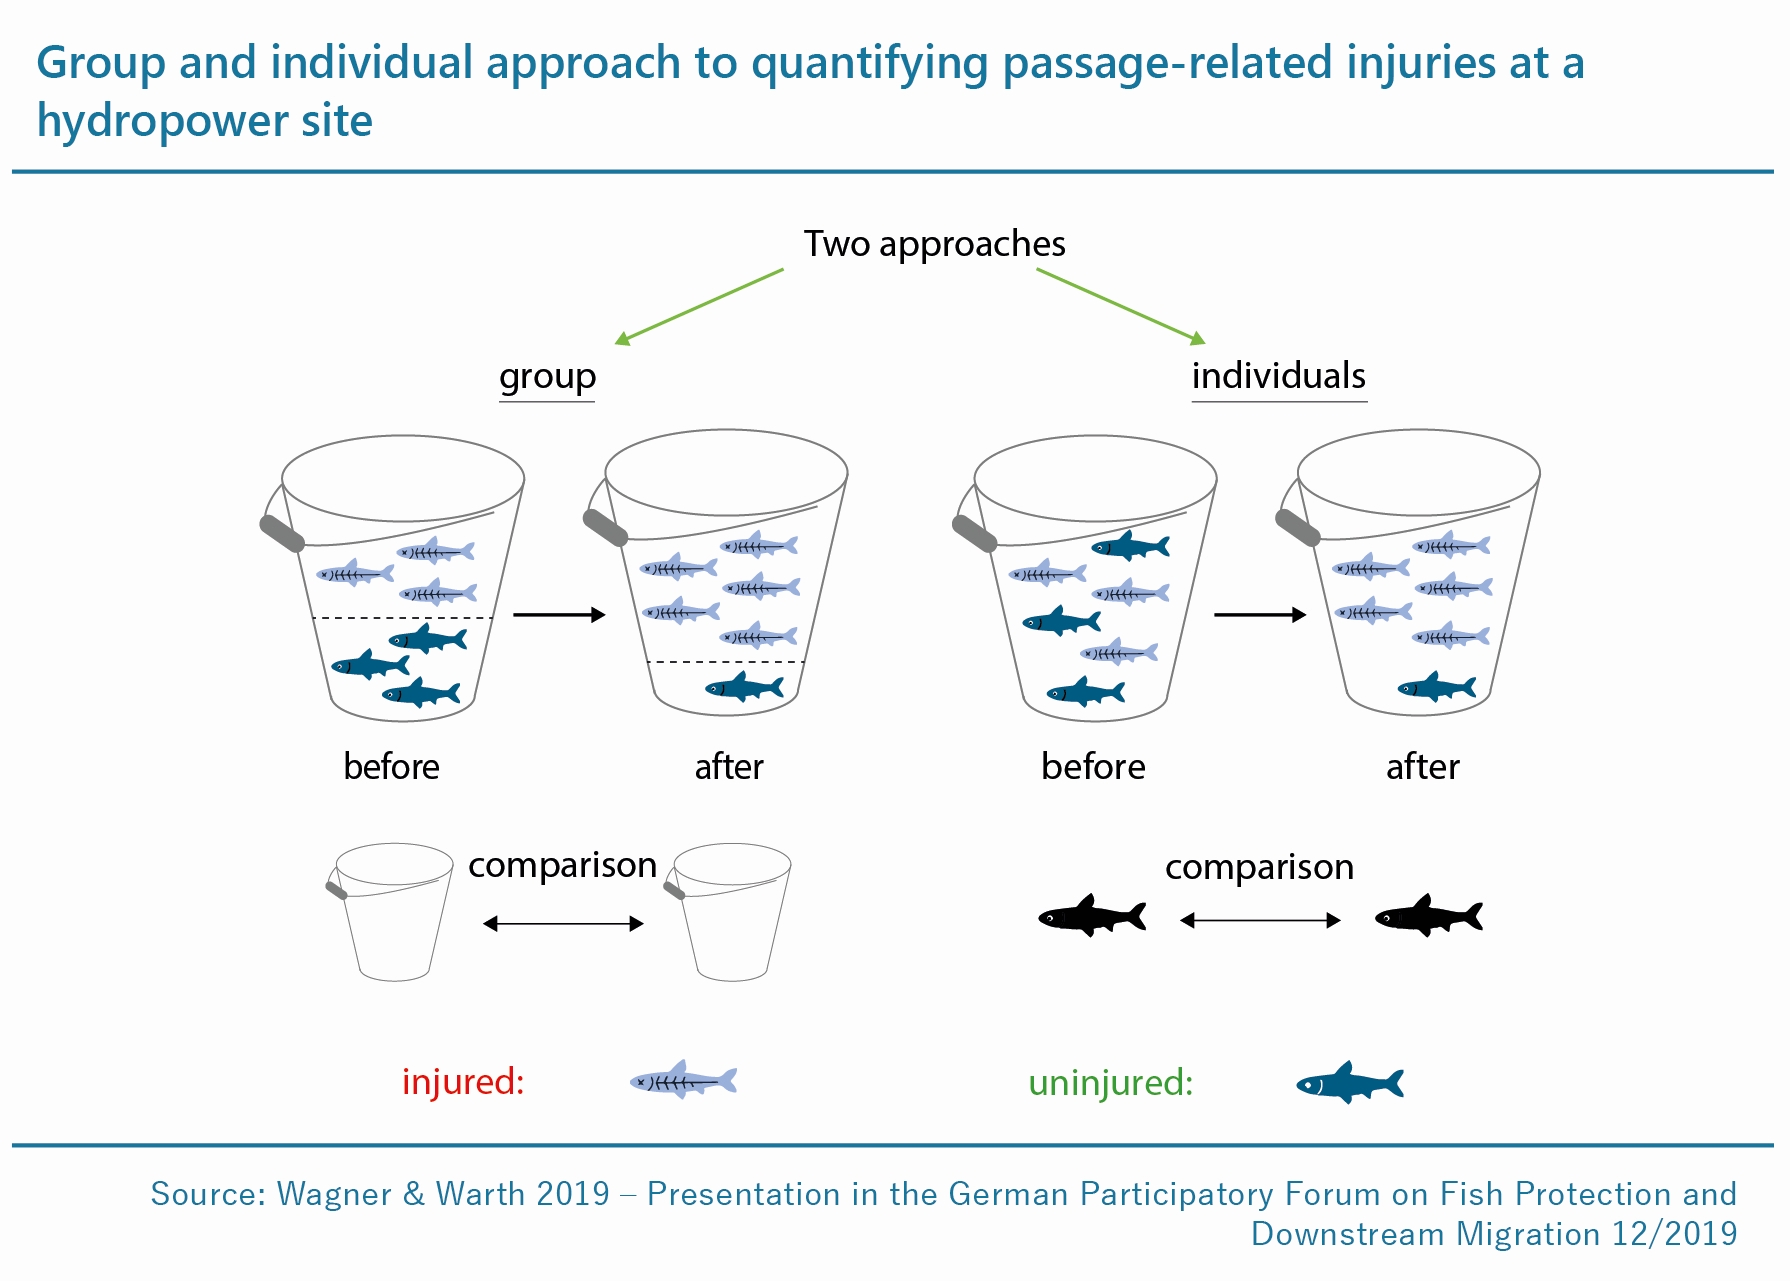 Infographic on group and individual approach to quantifying passage-related injuries in a hydropower site.